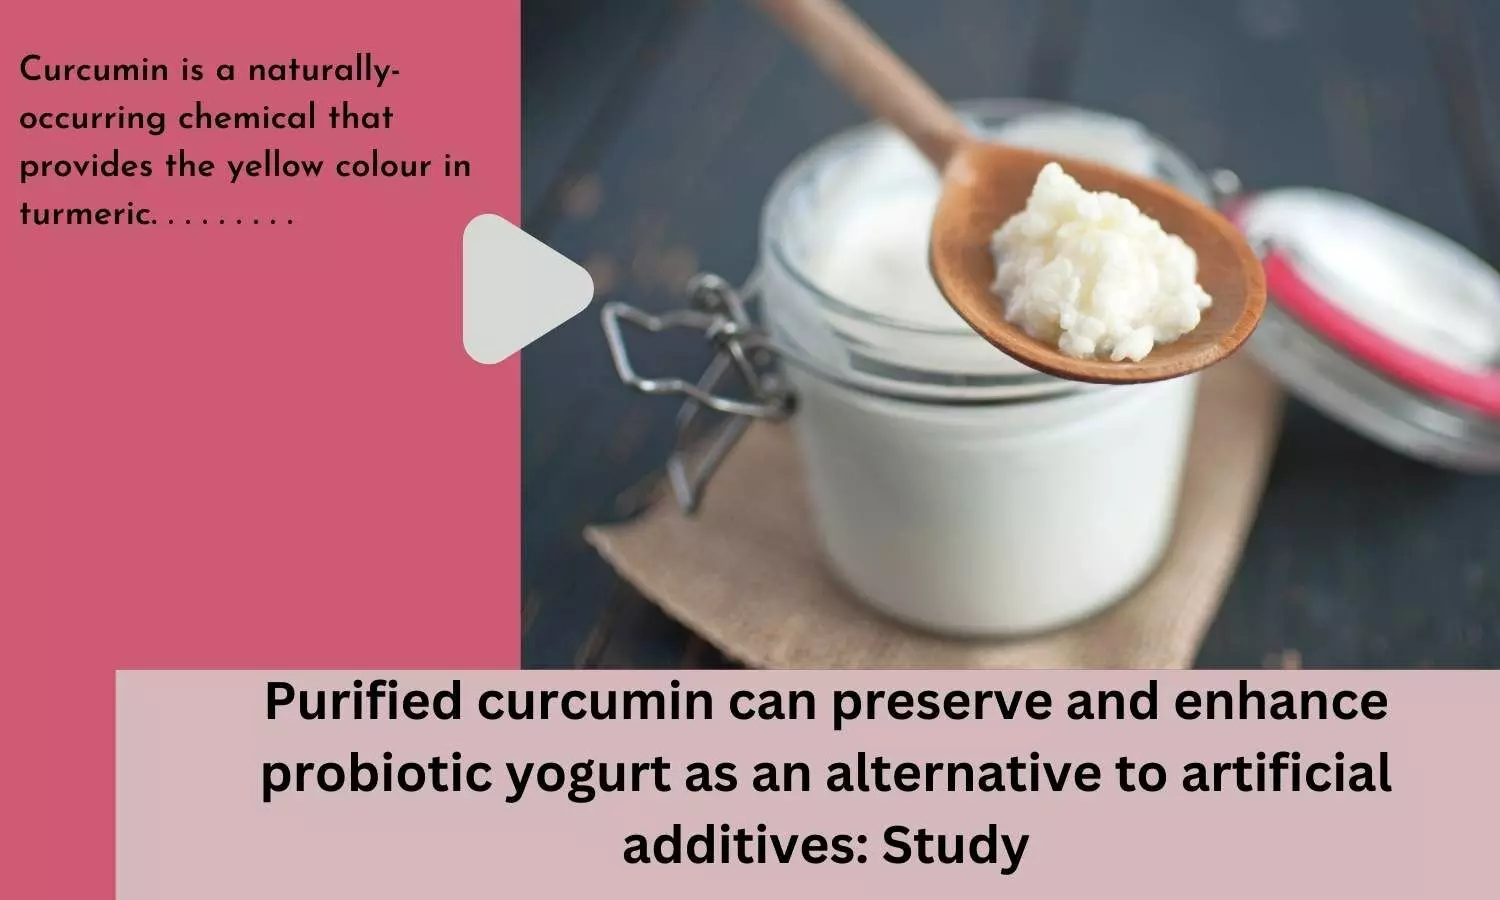 Purified curcumin can preserve and enhance probiotic yogurt as an alternative to artificial additives: Study